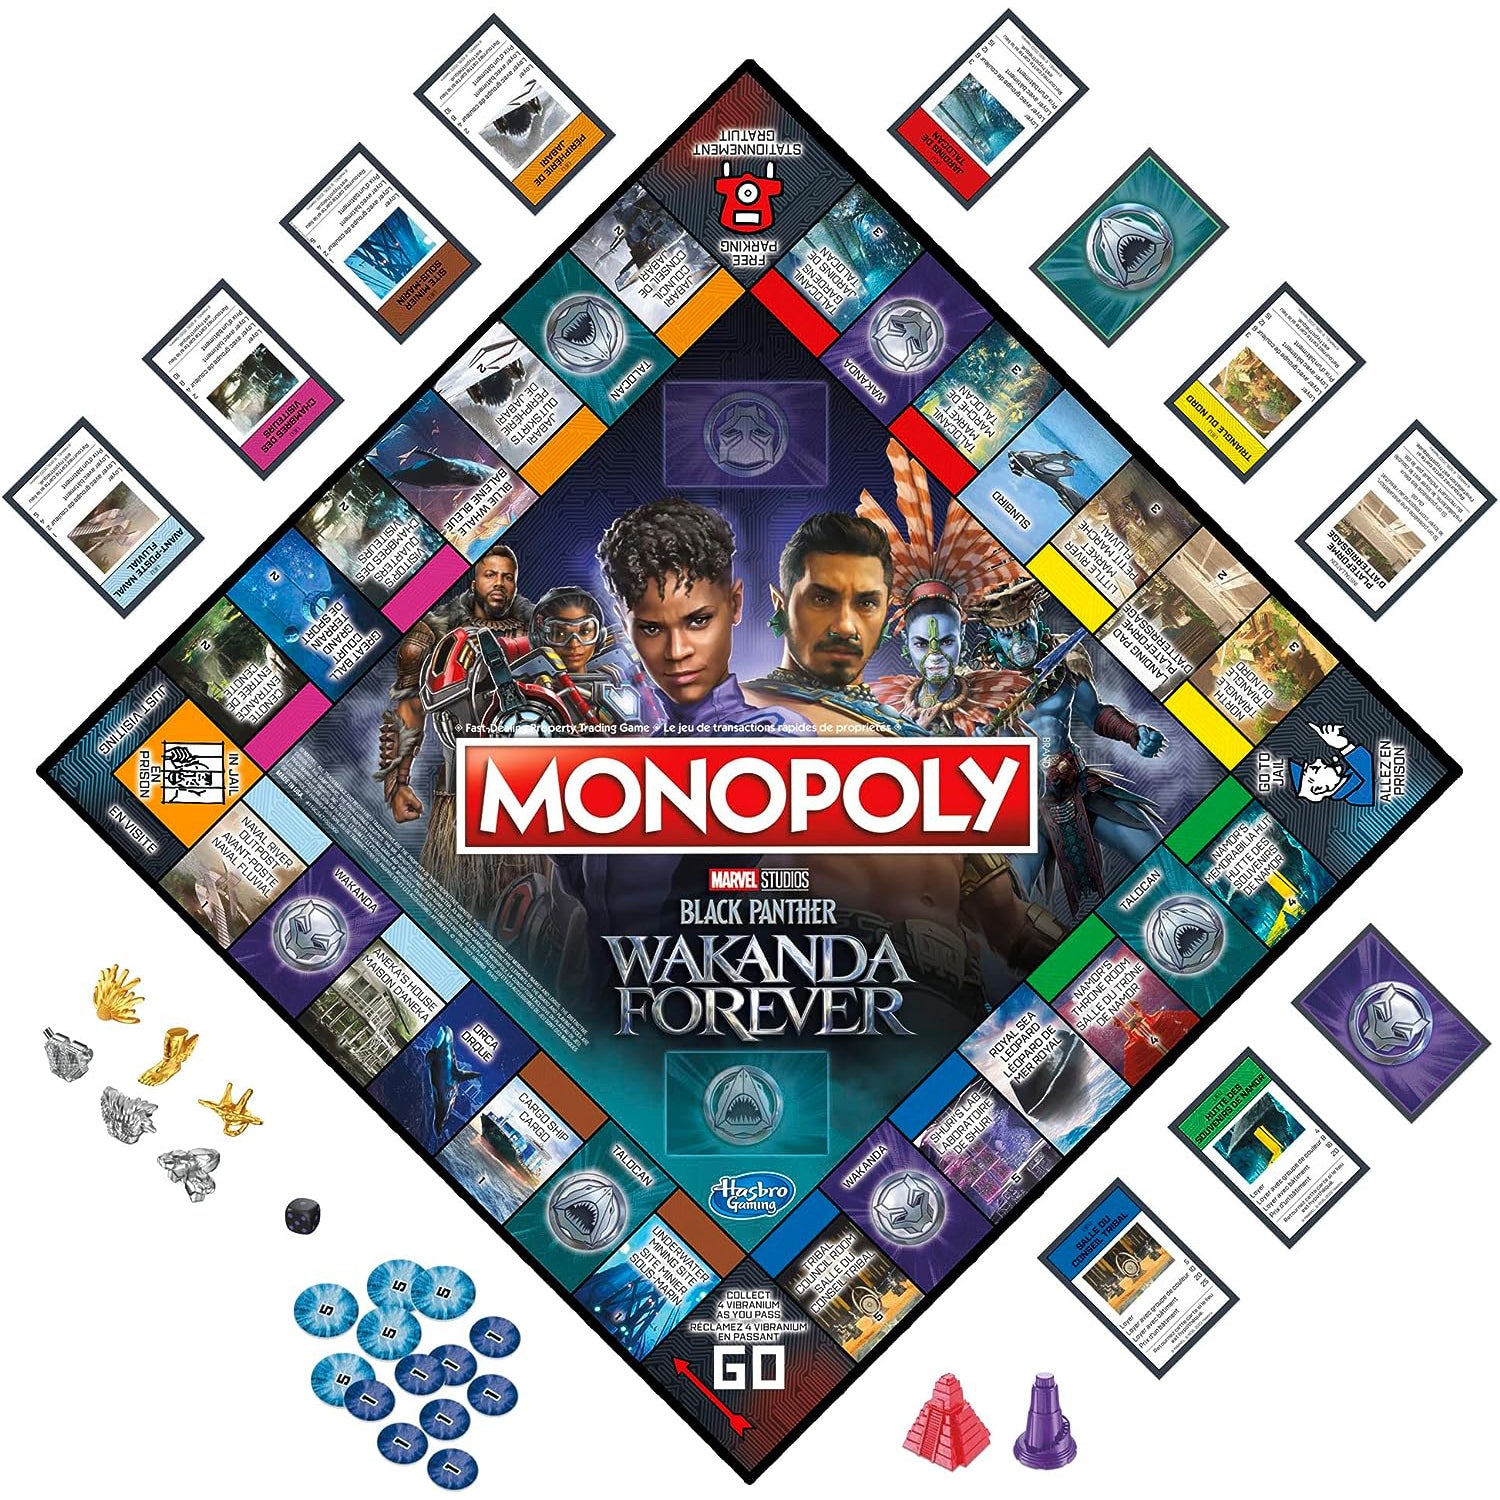 Monopoly - Black Panther Wakanda Forever Edition